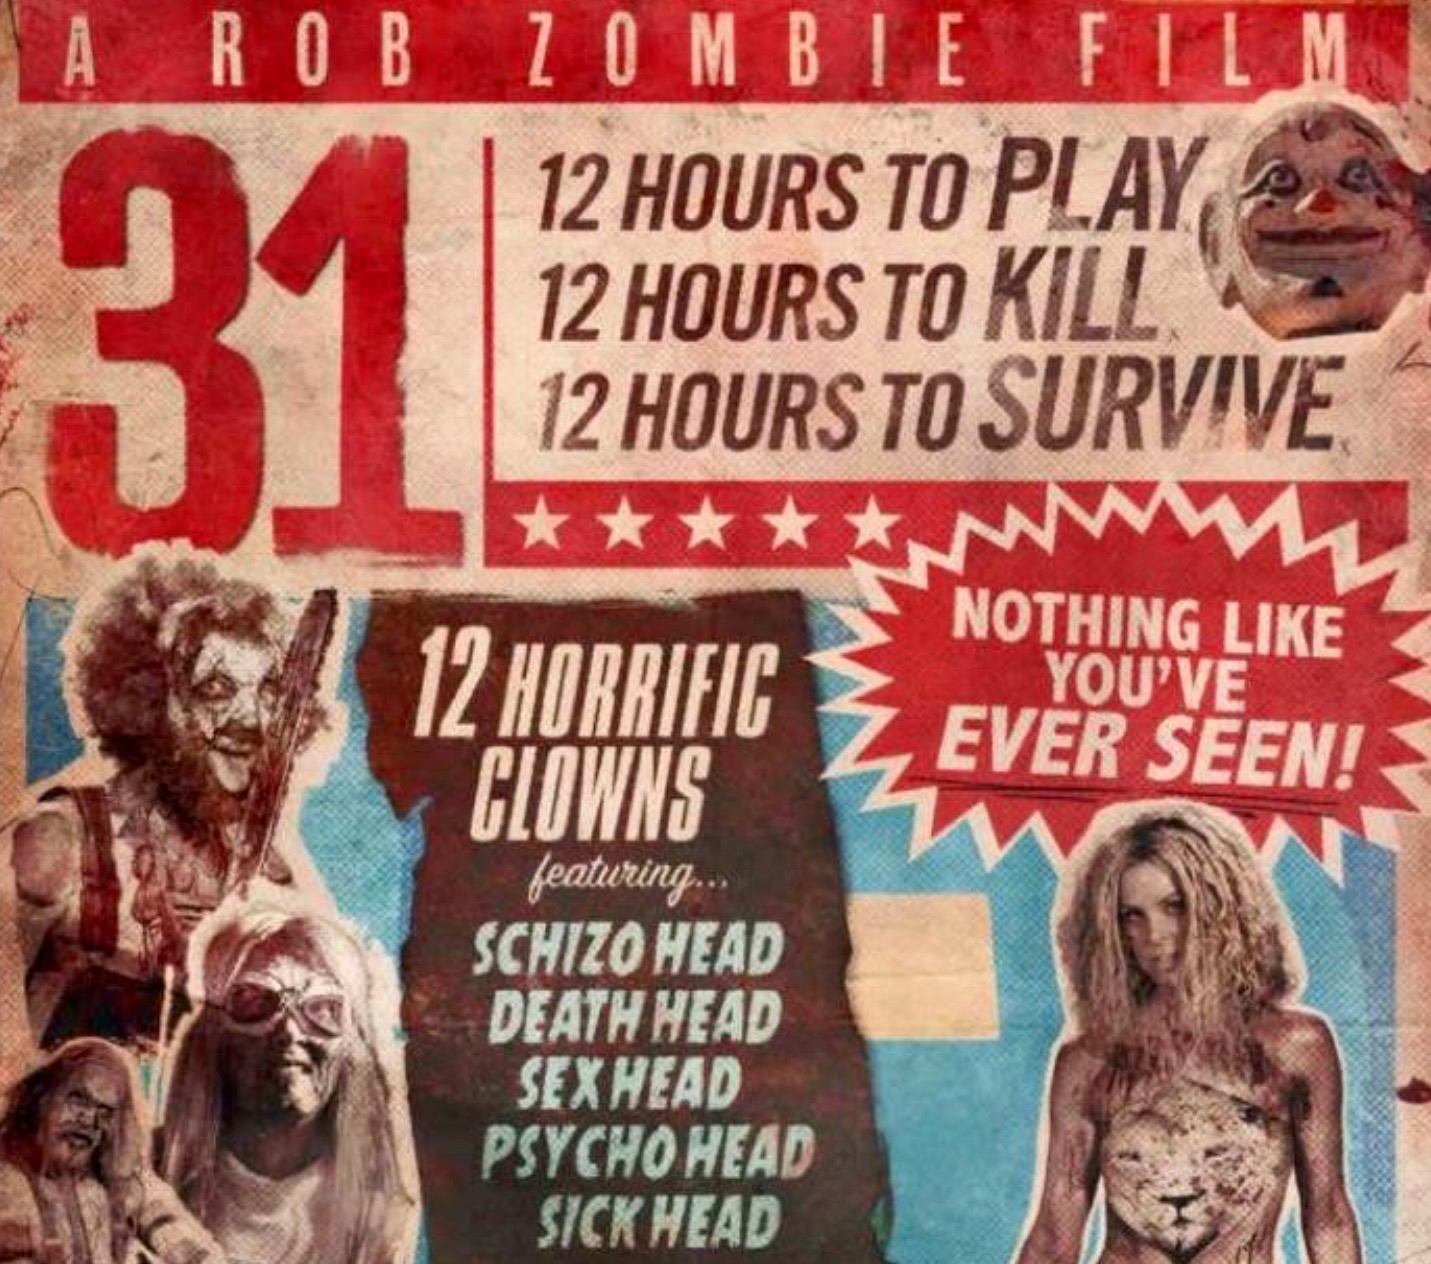 Rob Zombie's "31" Looks To Be As Twisted As "Texas Chainsaw Masscare"